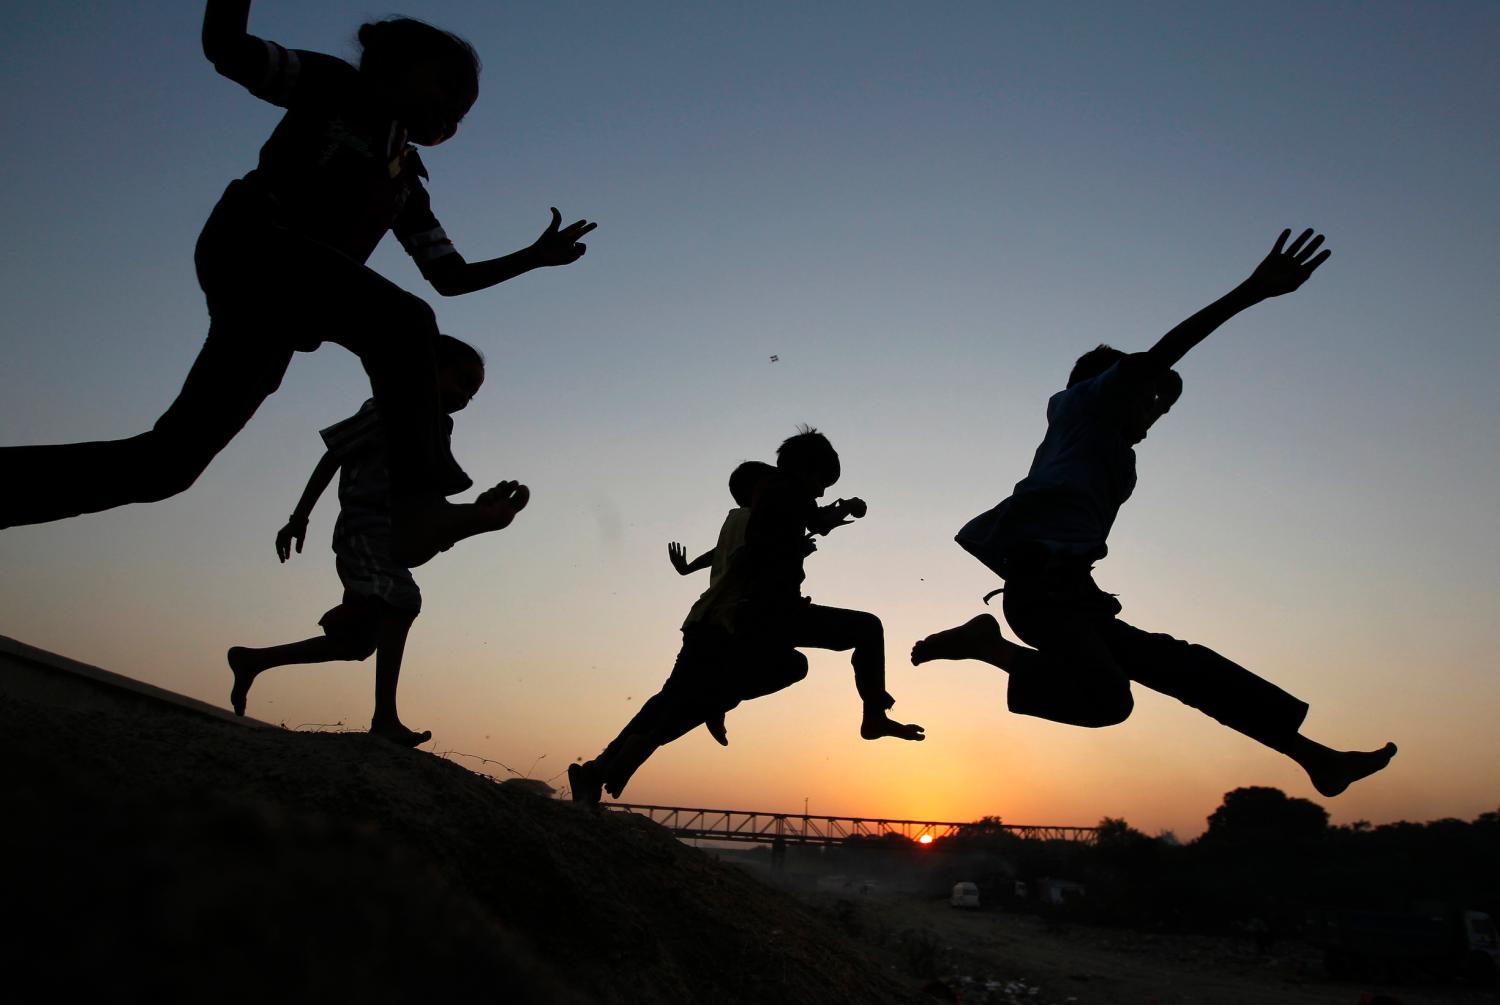 Children play on a sand dune as they are silhouetted against the setting sun in the western Indian city of Ahmedabad November 28, 2014. REUTERS/Amit Dave (INDIA - Tags: SOCIETY TPX IMAGES OF THE DAY) - GM1EABS1NFQ01